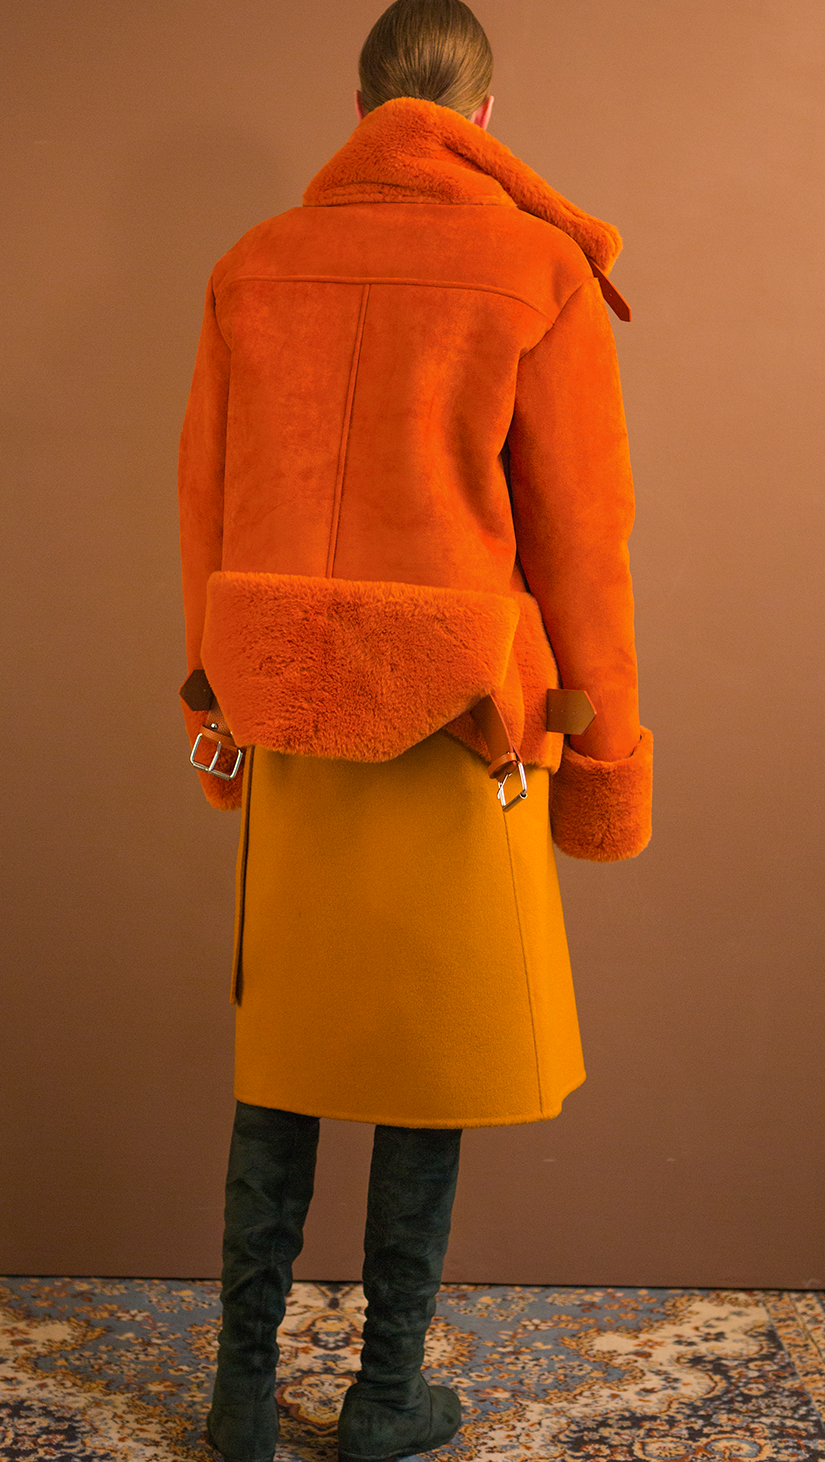 Moto-style suede shearling jacket fully lined in orange shearling. Super soft in suede, dropped shoulder, extra long sleeves with soft shearling detail at cuffs, front zip pockets, gusseted back panel, belt at waist with bucket closure, zip closure with attached wide belt in belt loops, Medium-weight. Fully lined. Oversized. Relaxed silhouette.